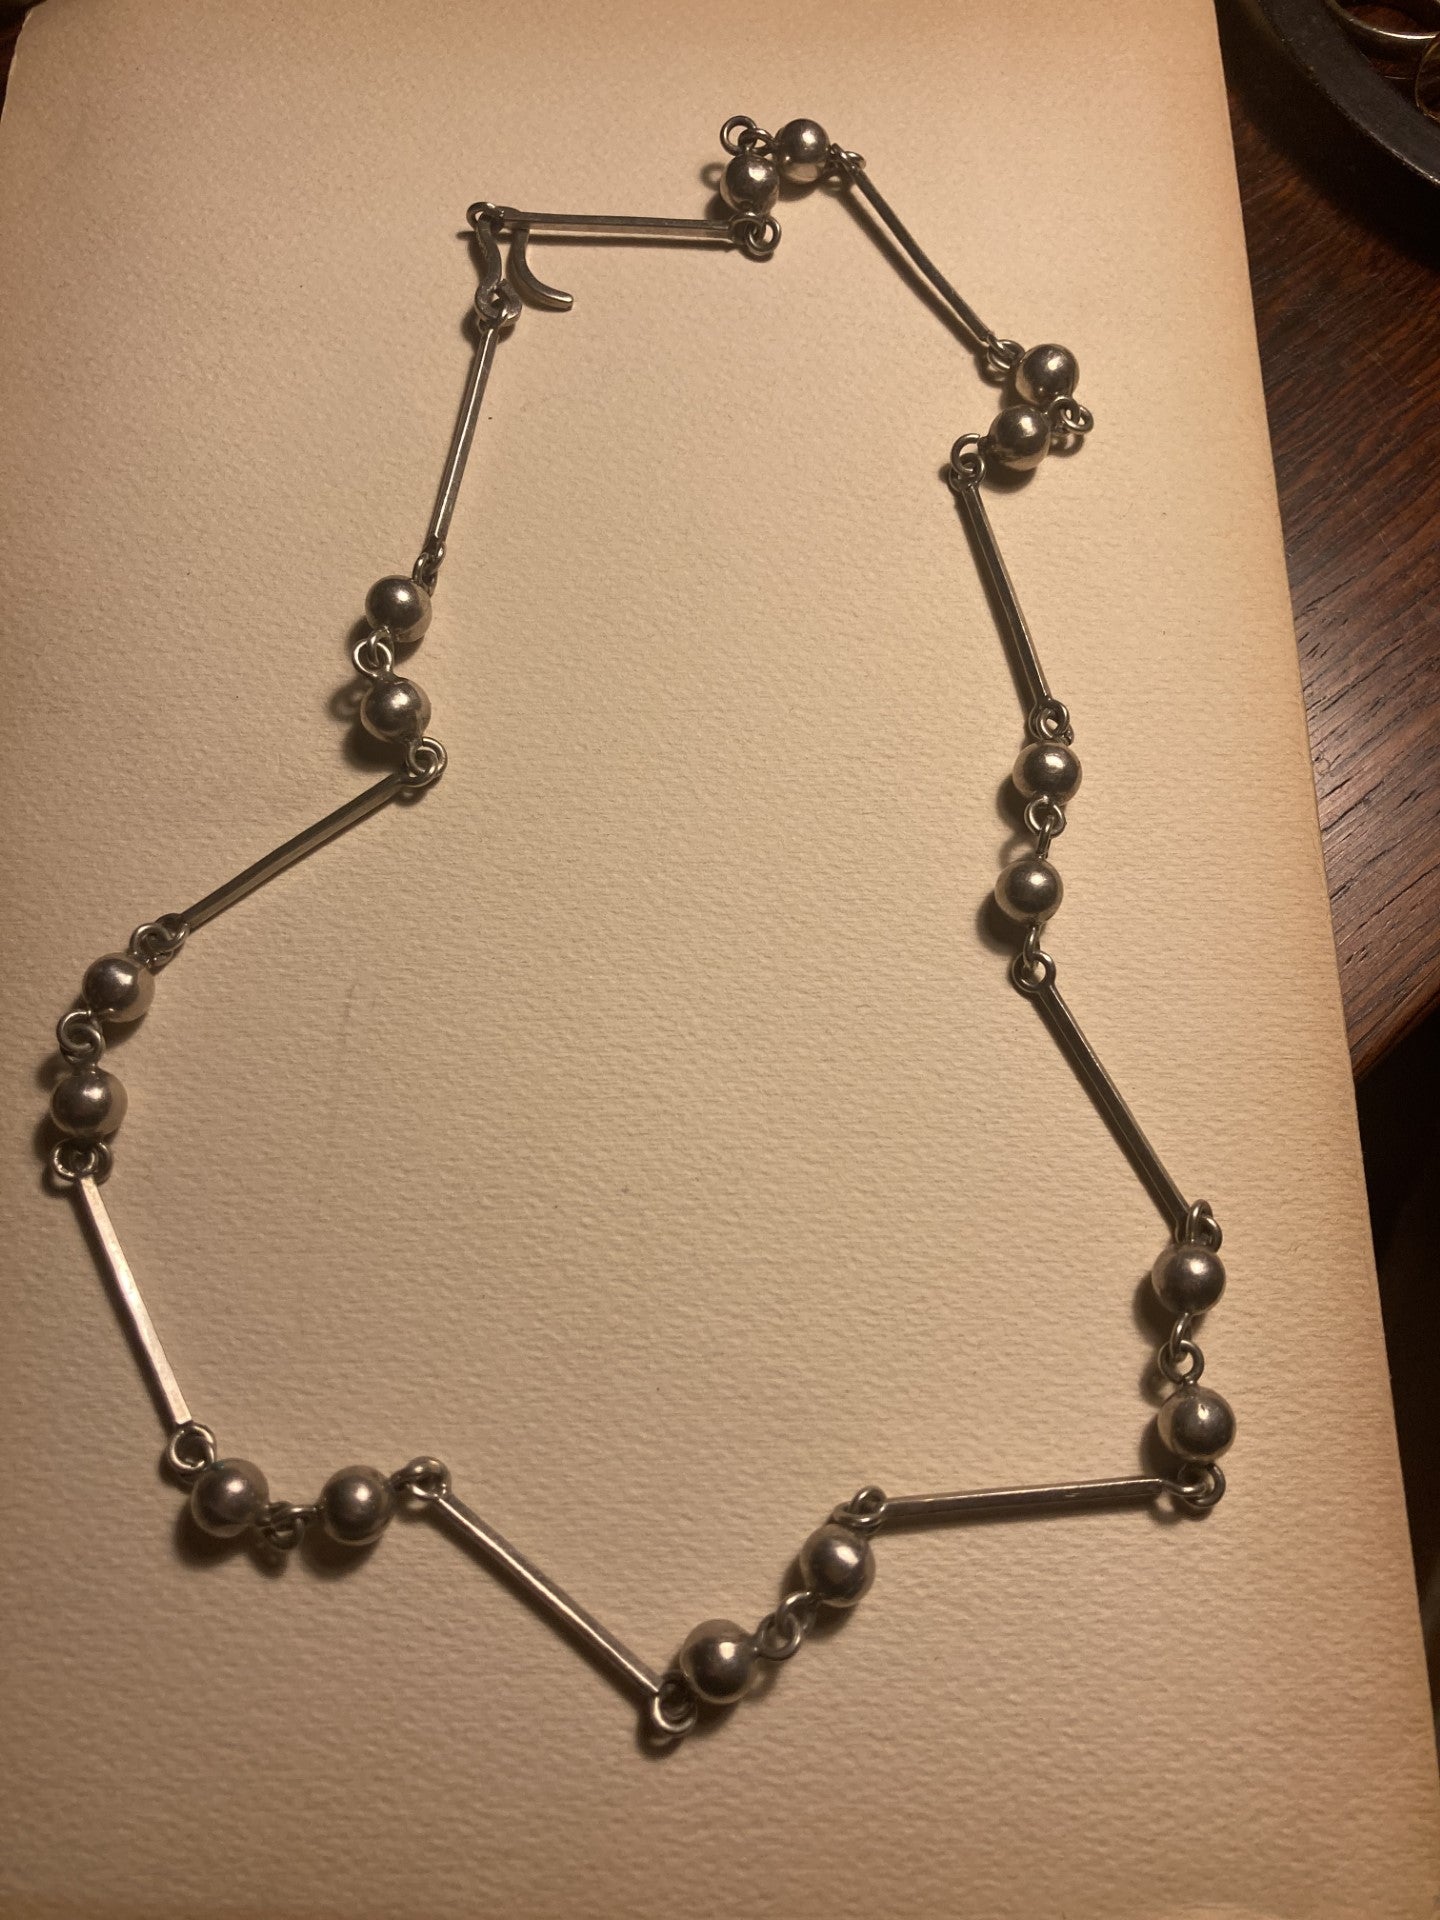 Beautiful silver necklace from Mexico - no. 01050